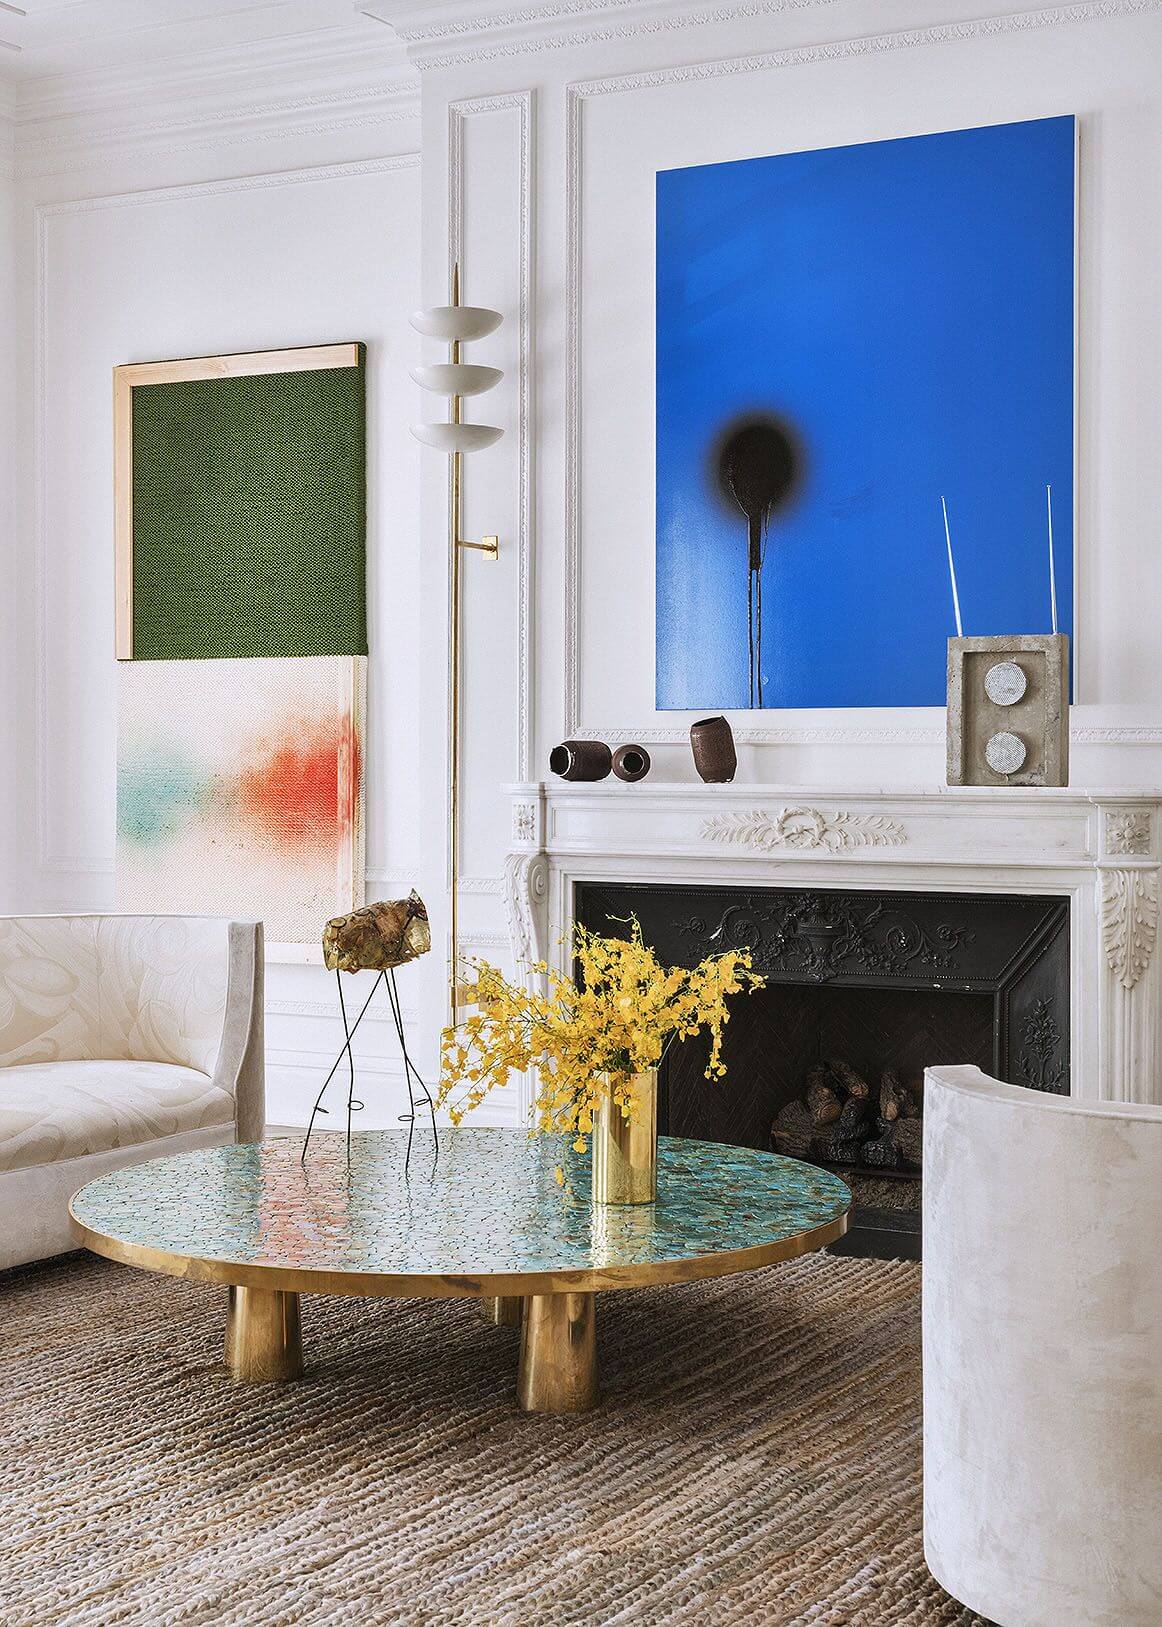 Art at Julie Hillman's interiors in modern eclectic style